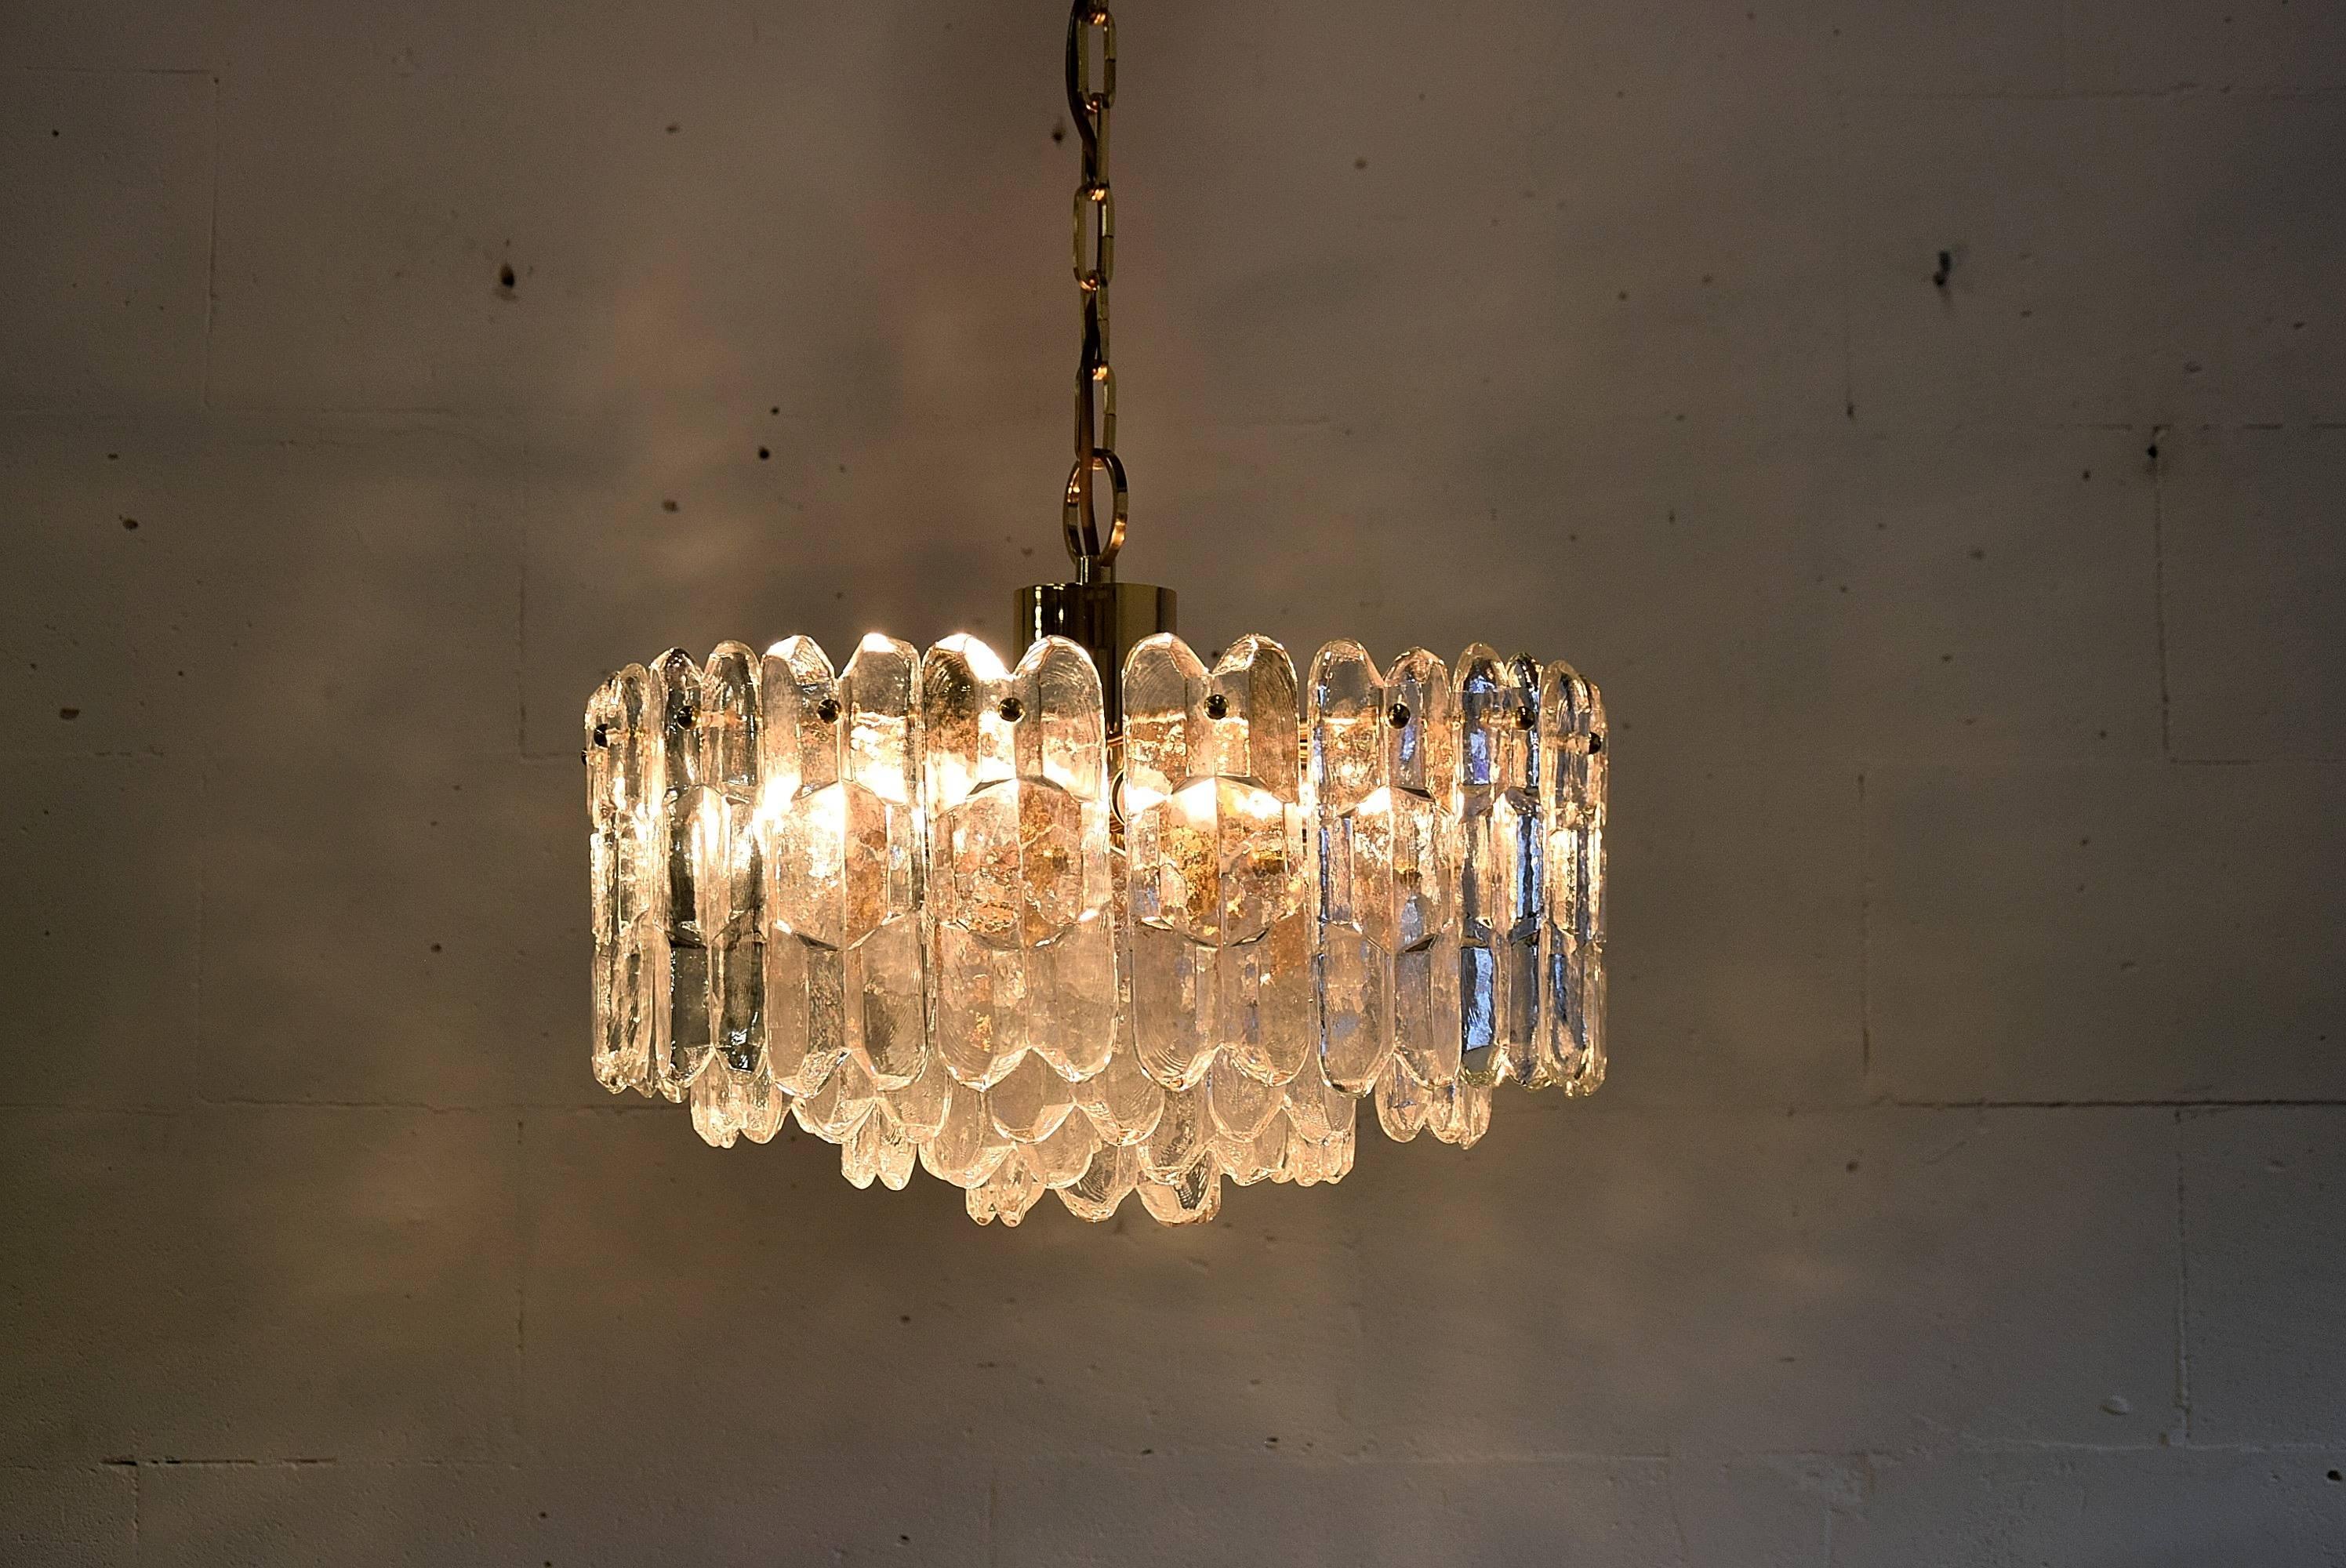 Large Palazzo chandelier Kalmar mid century modern
Large and exquisite 24-carat gold-plated brass and clear brilliant glass ‘Palazzo’ chandeliers by J.T. Kalmar, Vienna, Austria, manufactured in the late 1960s.

Labelled and documented in the Kalmar